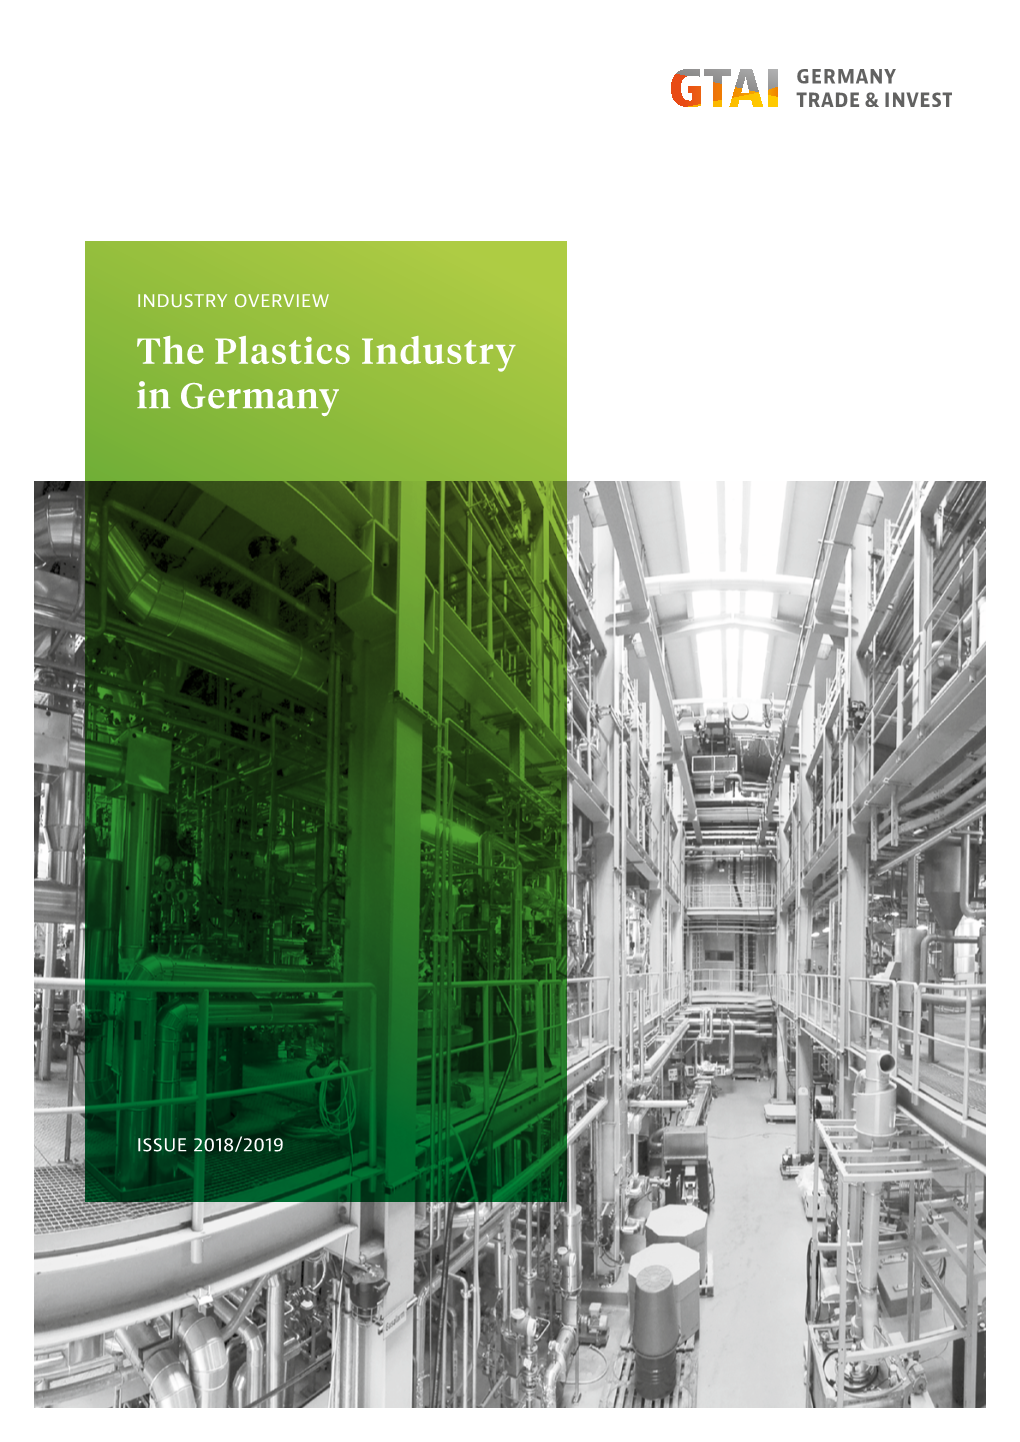 The Plastics Industry in Germany